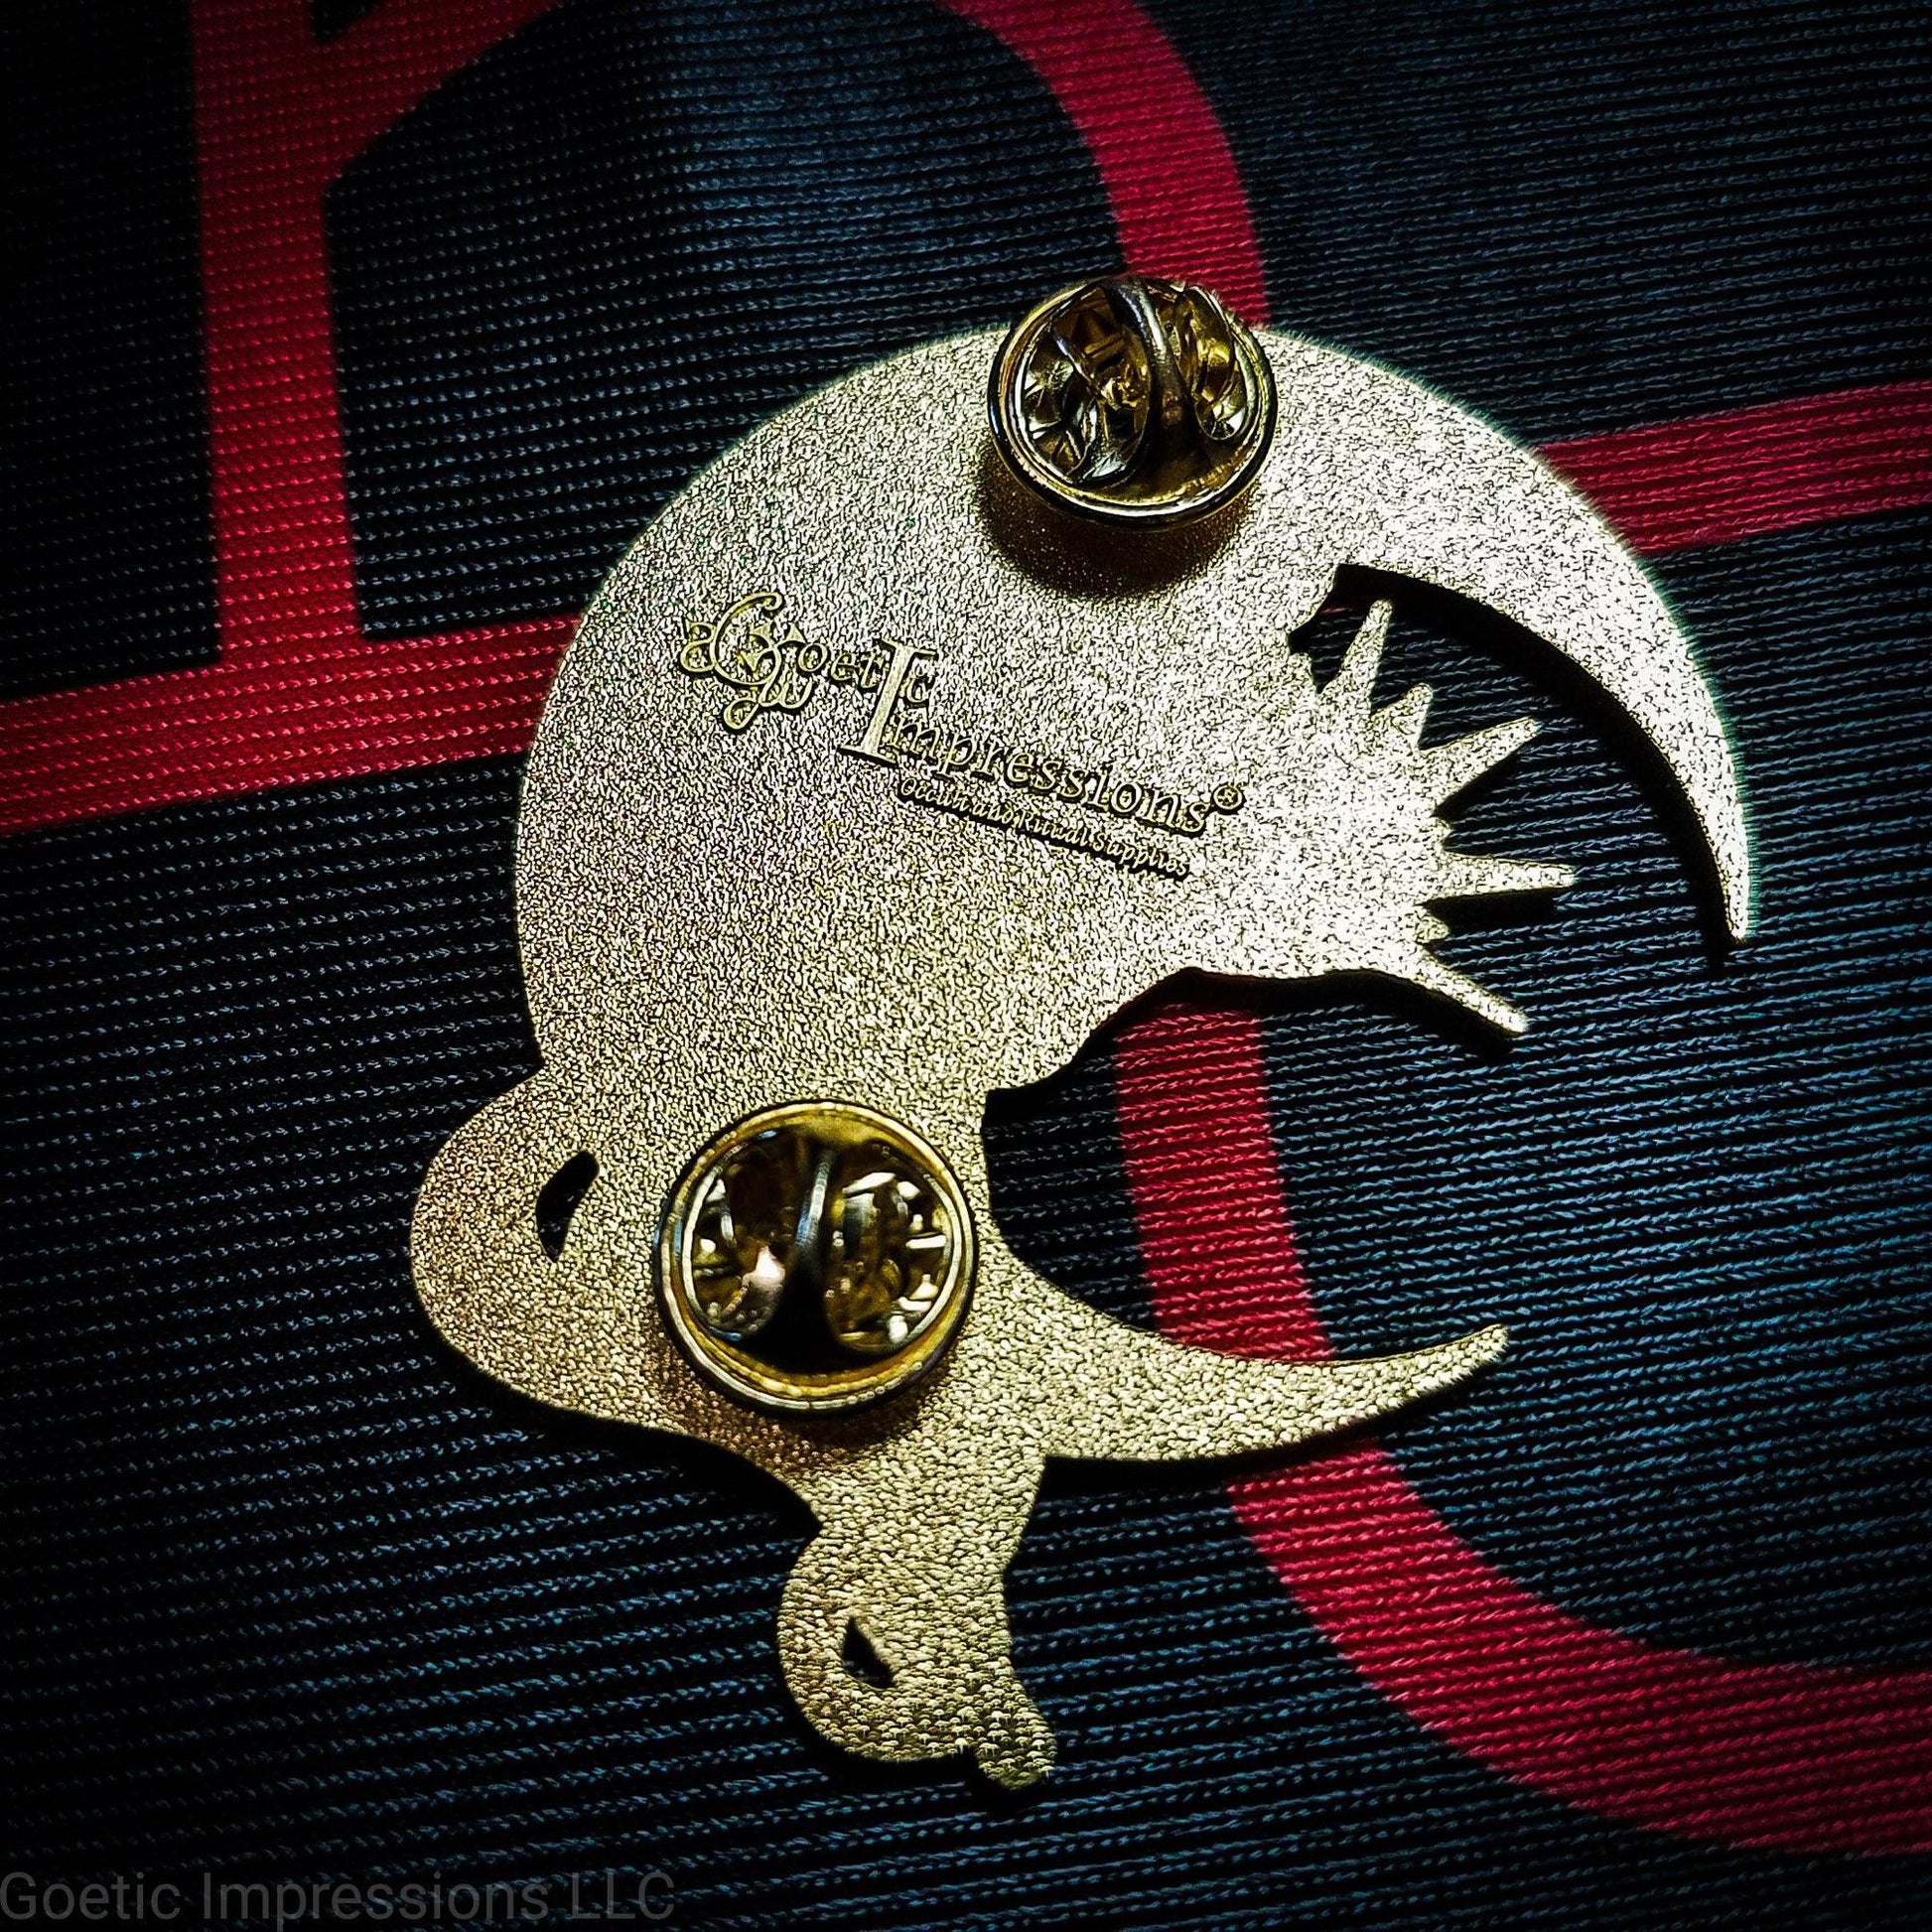 The back of a Lilith pin with the Goetic Impressions logo stamped on the back. The pin has two clutches.